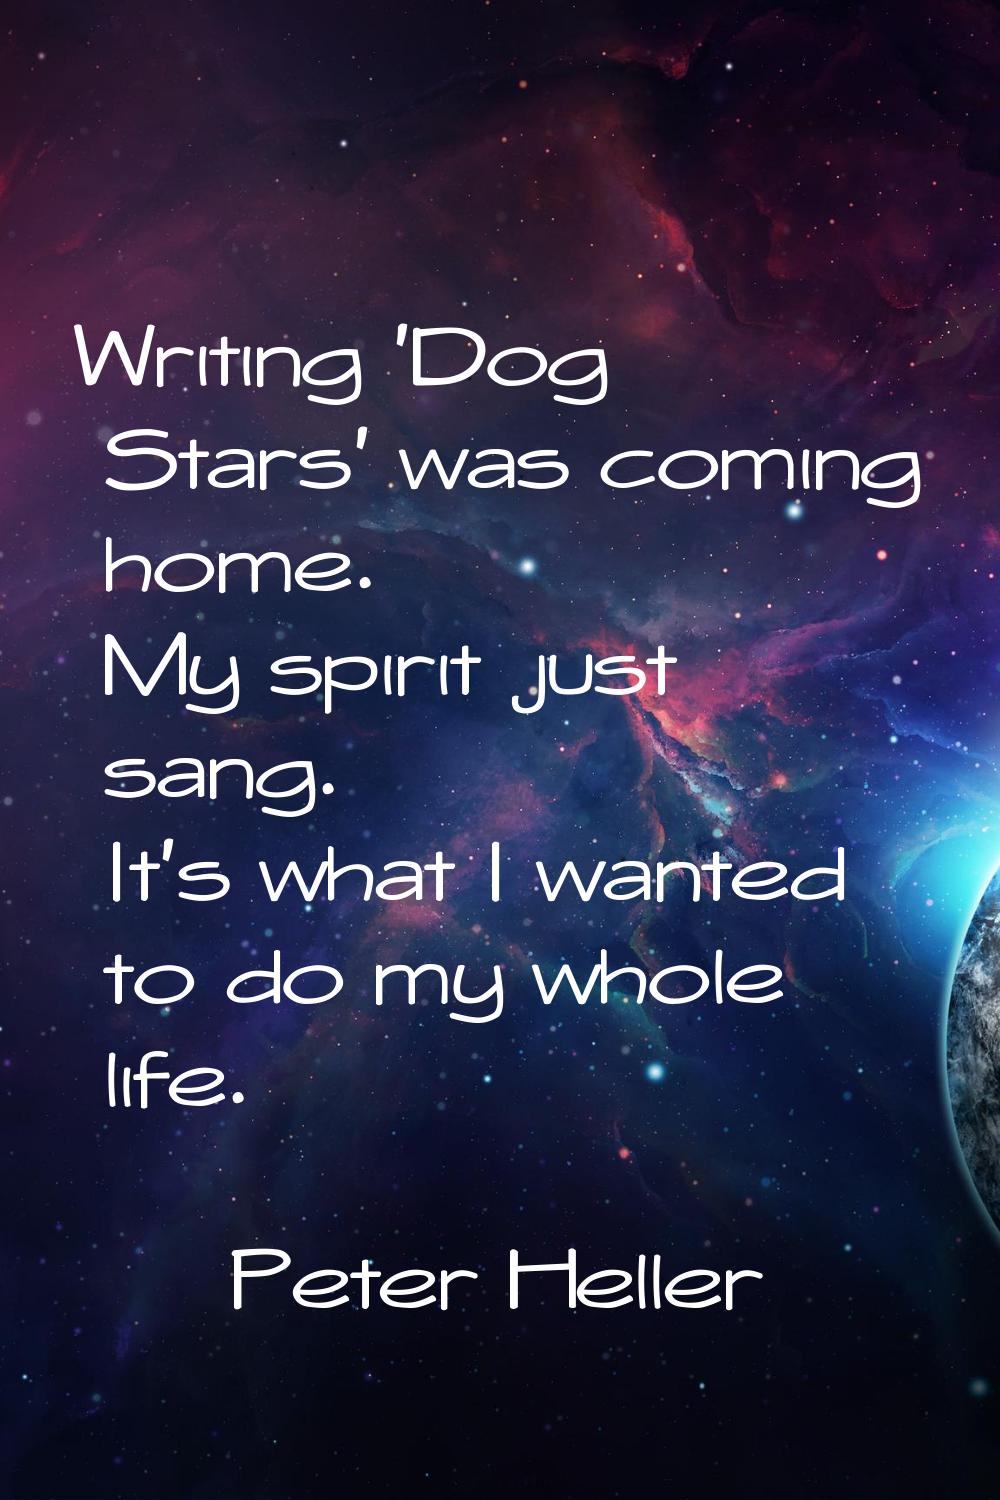 Writing 'Dog Stars' was coming home. My spirit just sang. It's what I wanted to do my whole life.